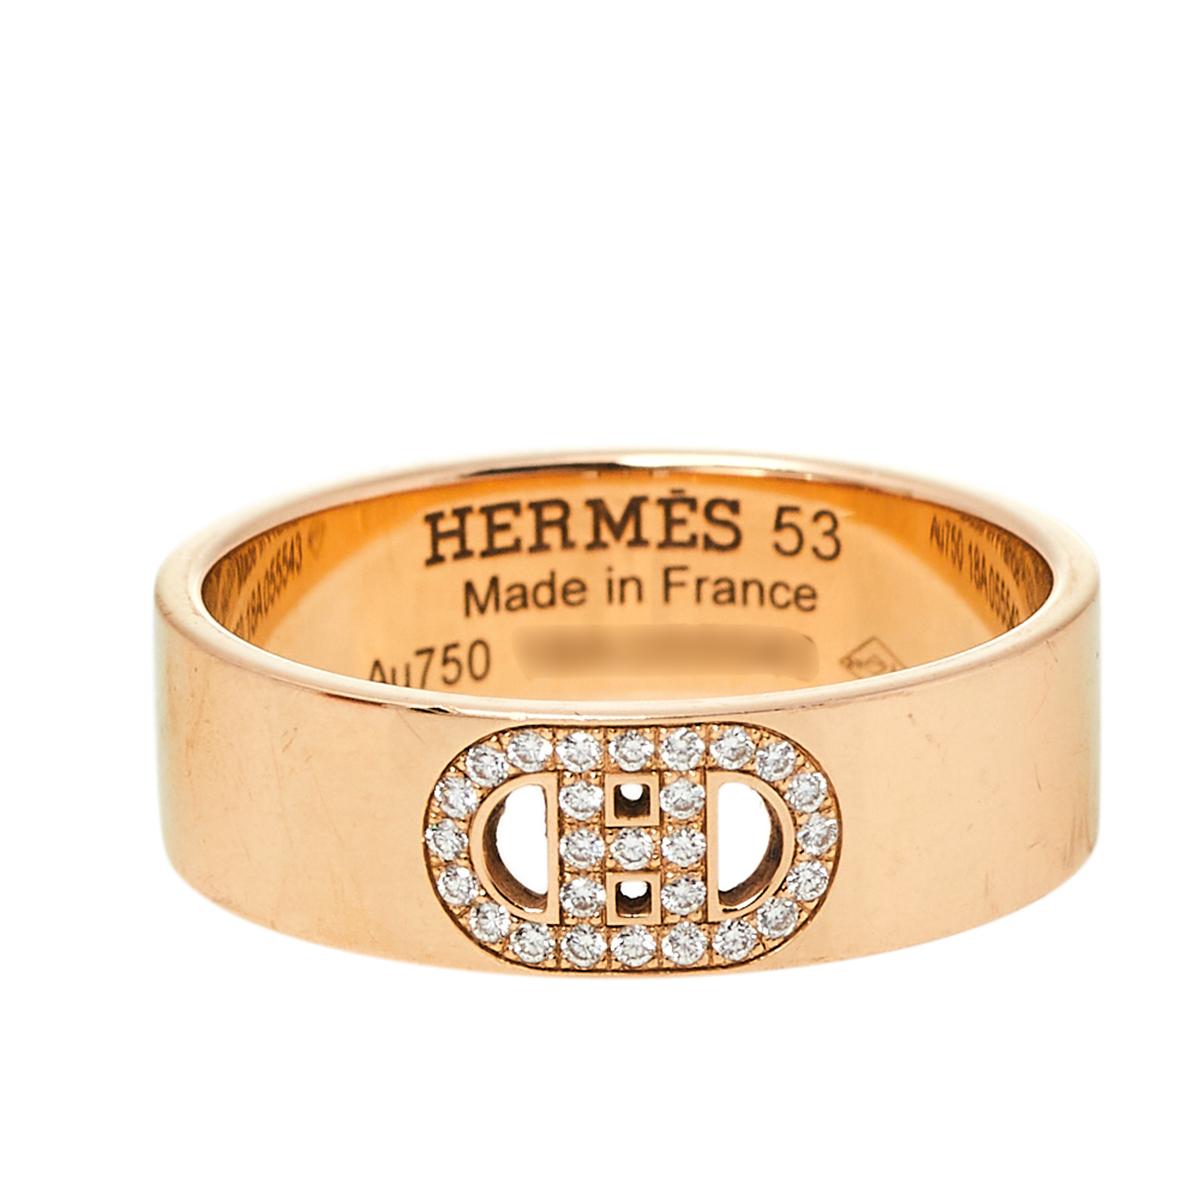 Beautifully sculpted using 18k rose gold, this Hermès fine jewelry piece is created to sit luxuriously on your finger. It is designed as a smooth, simple band contrasted with the Hermès H d'Ancre motif, set with sparkling diamonds.

Includes: